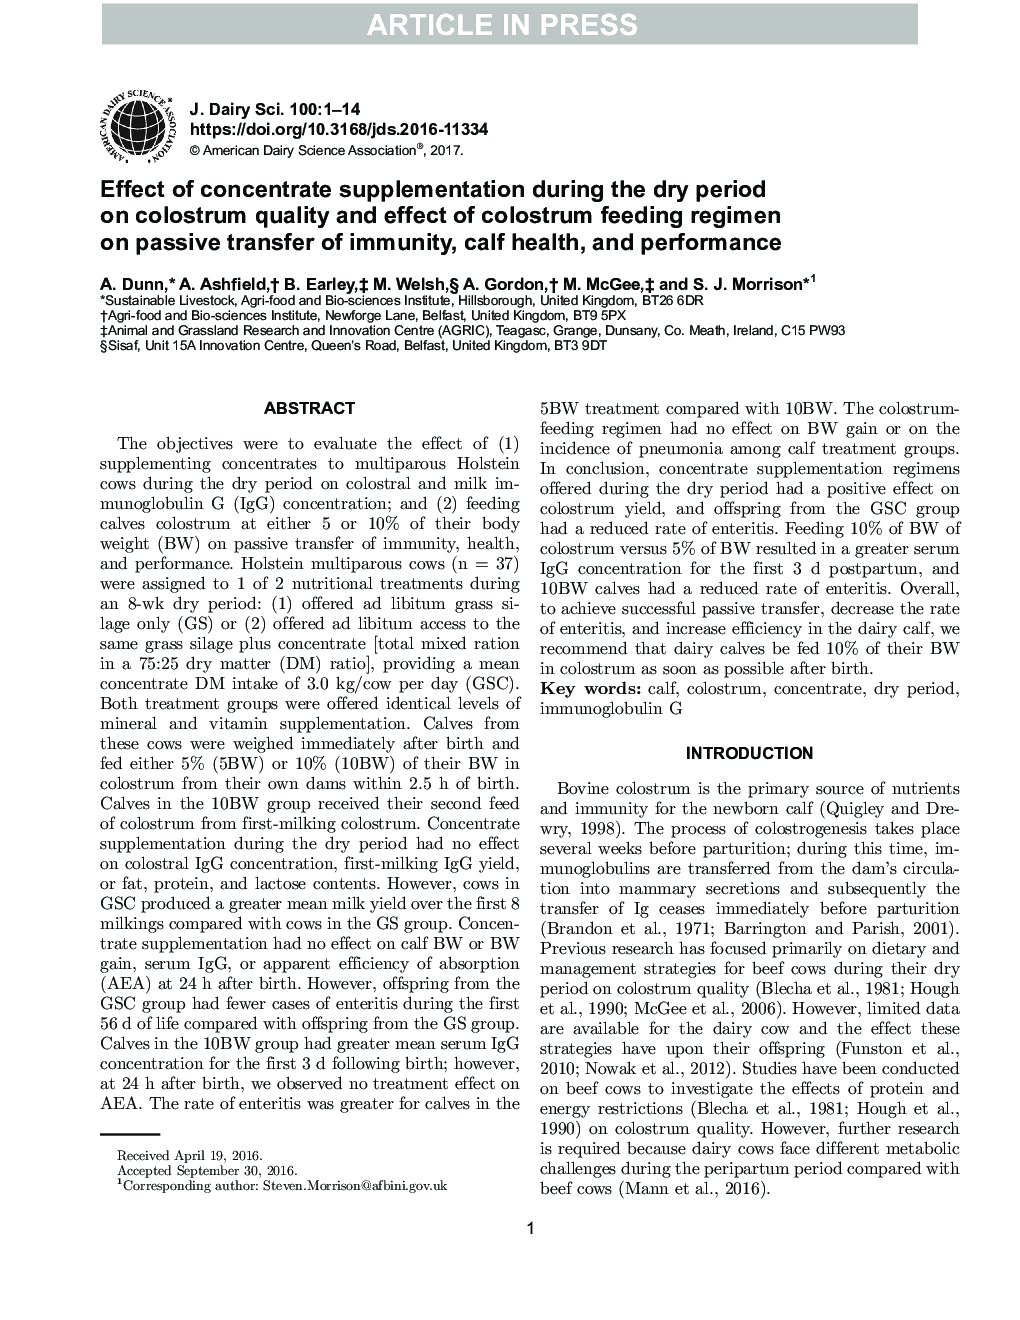 Effect of concentrate supplementation during the dry period on colostrum quality and effect of colostrum feeding regimen on passive transfer of immunity, calf health, and performance